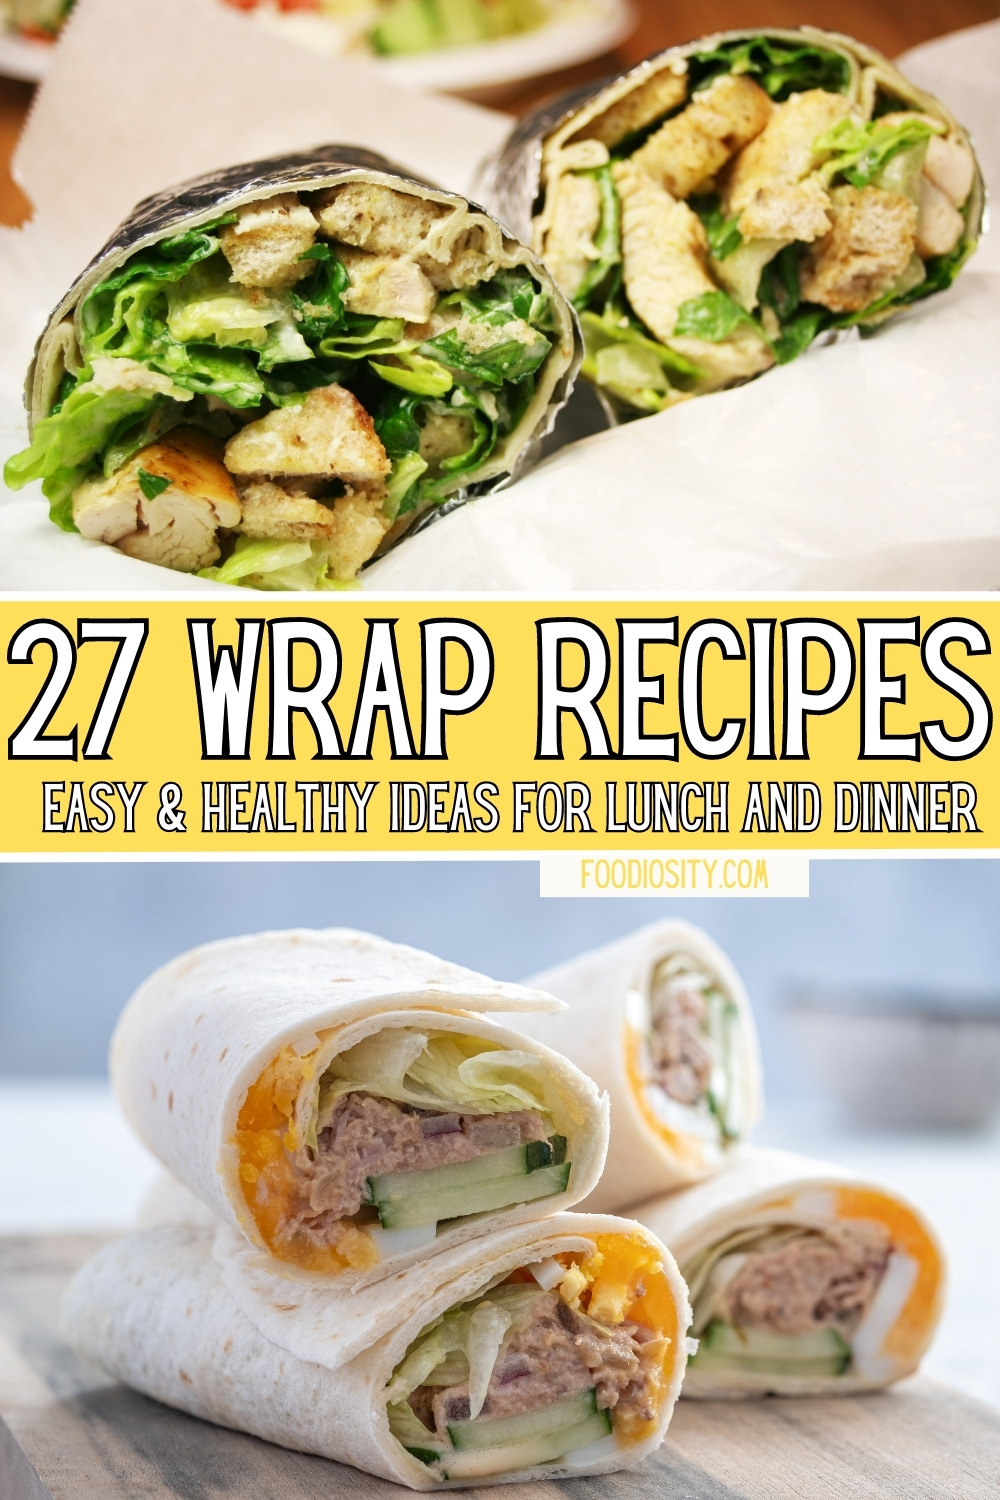 27 wrap recipes easy healthy lunch dinner 1